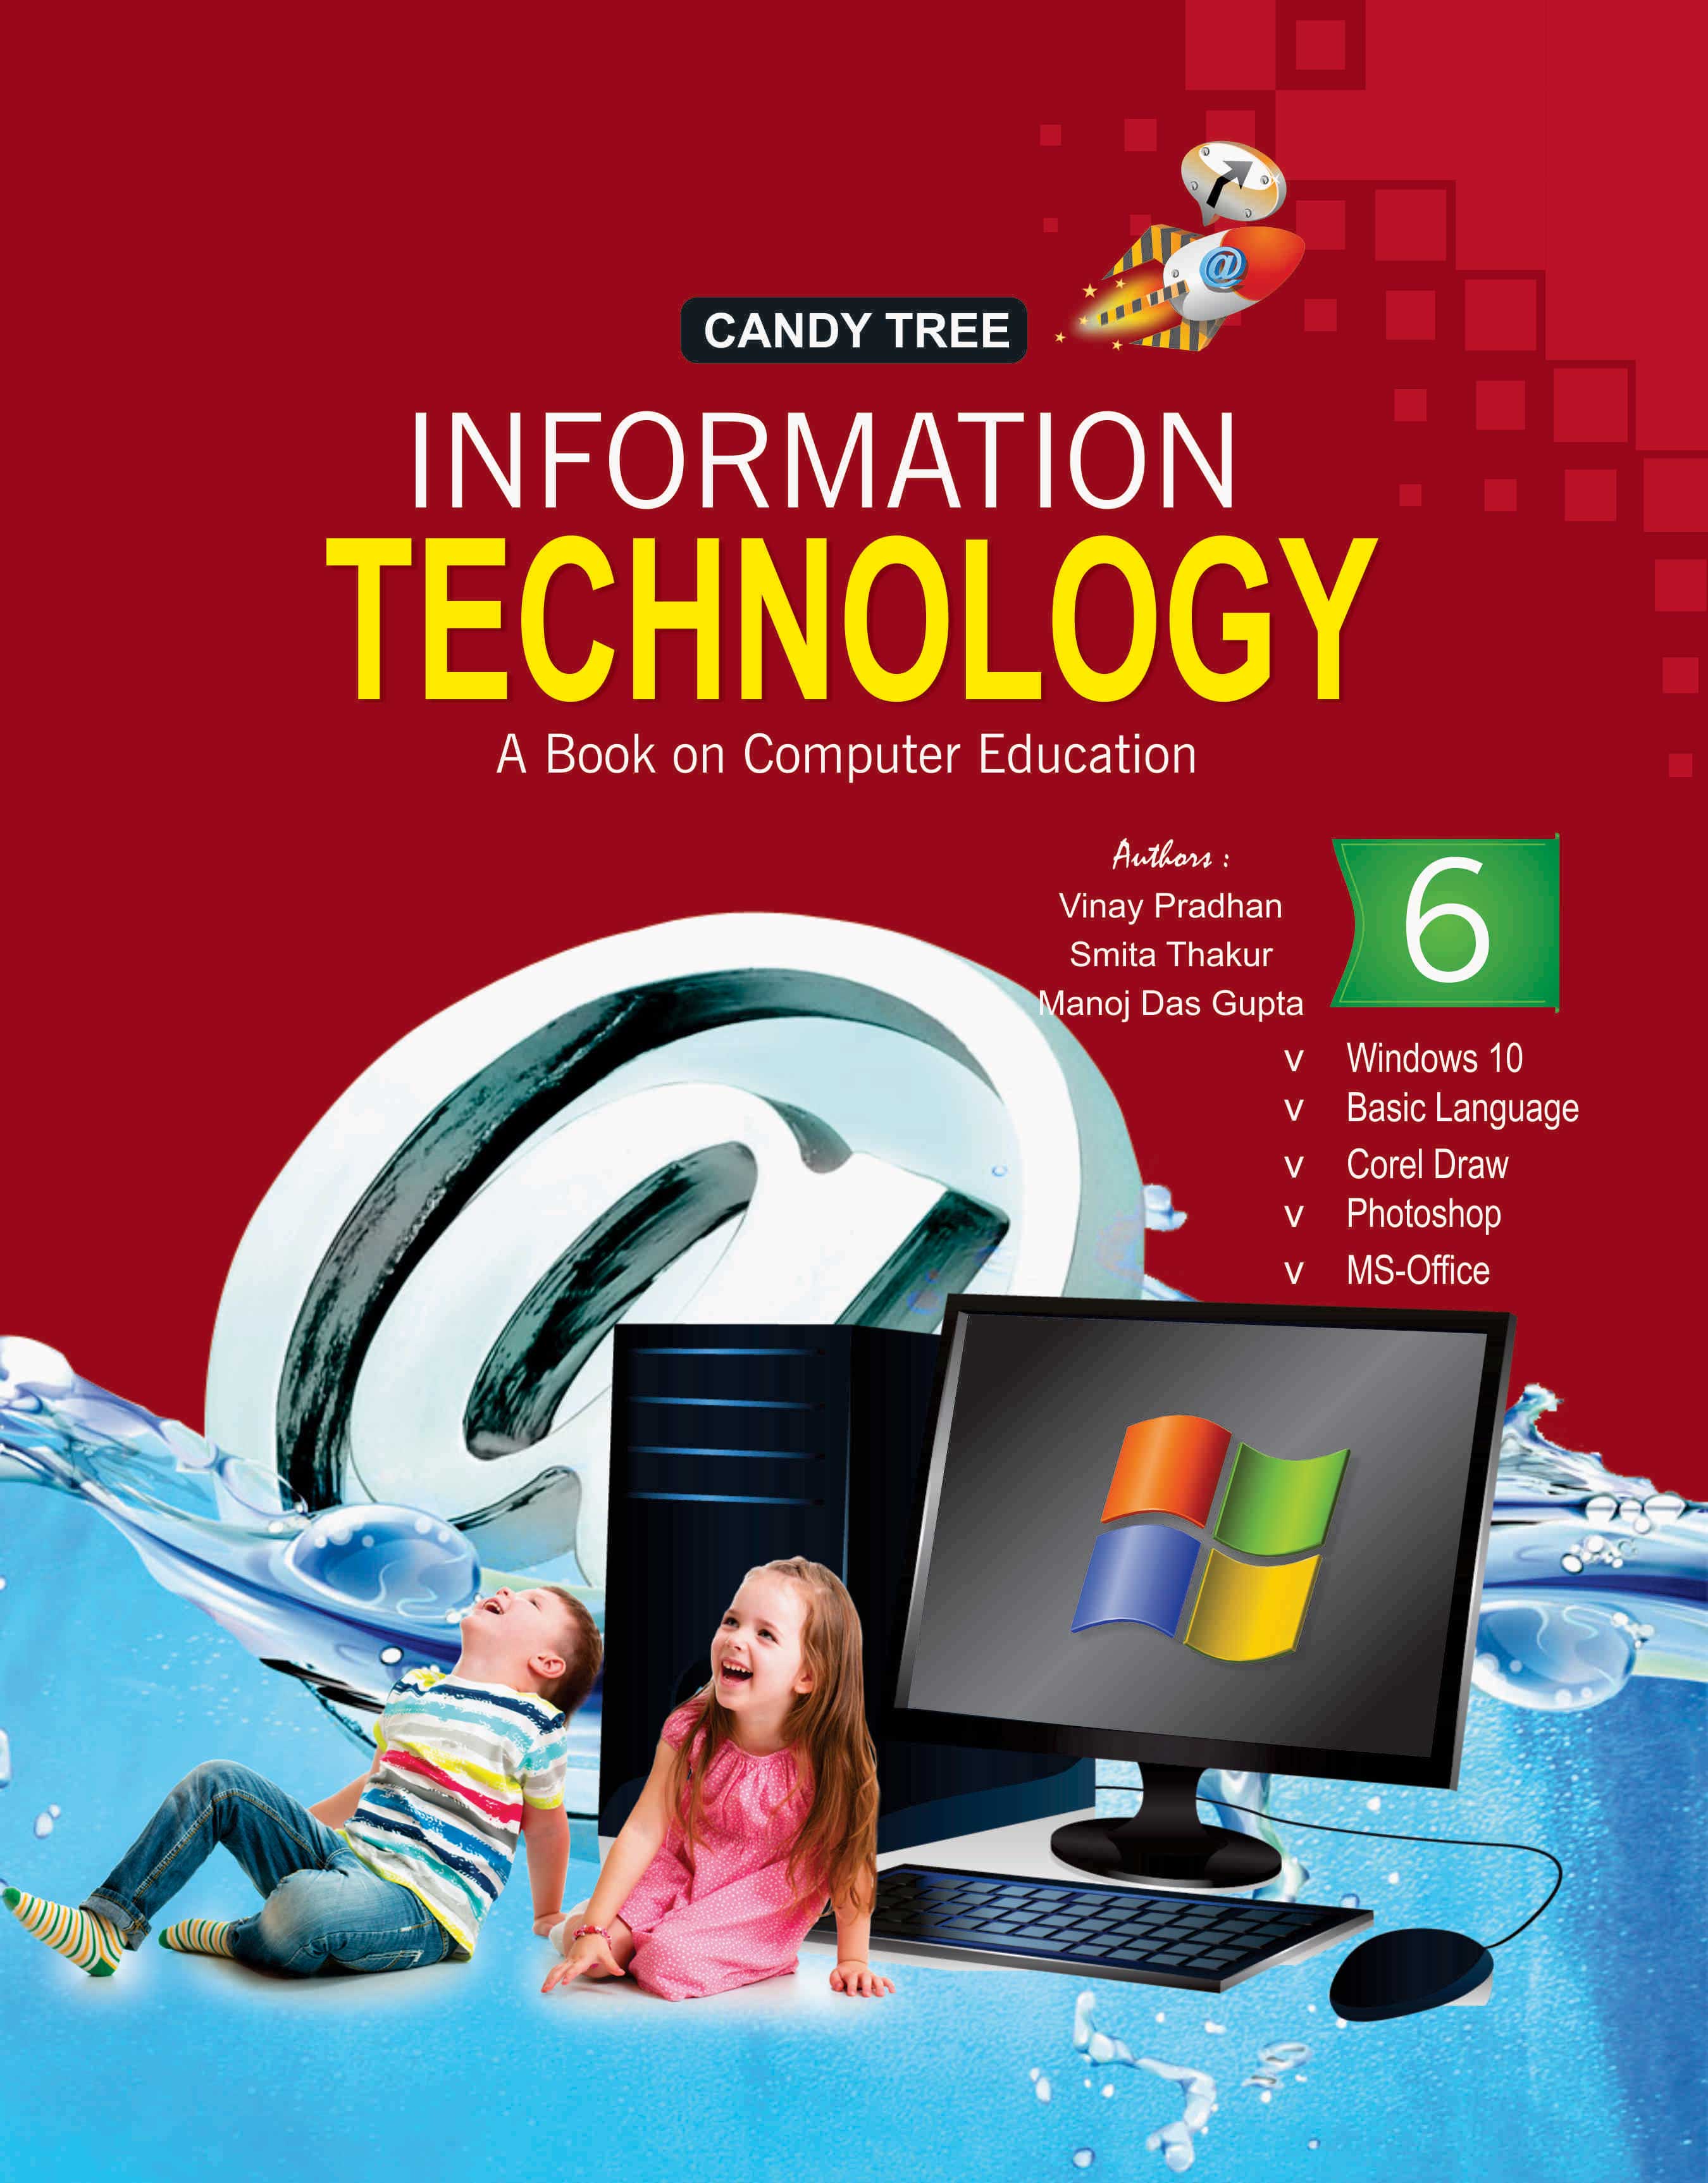 candy tree information technology